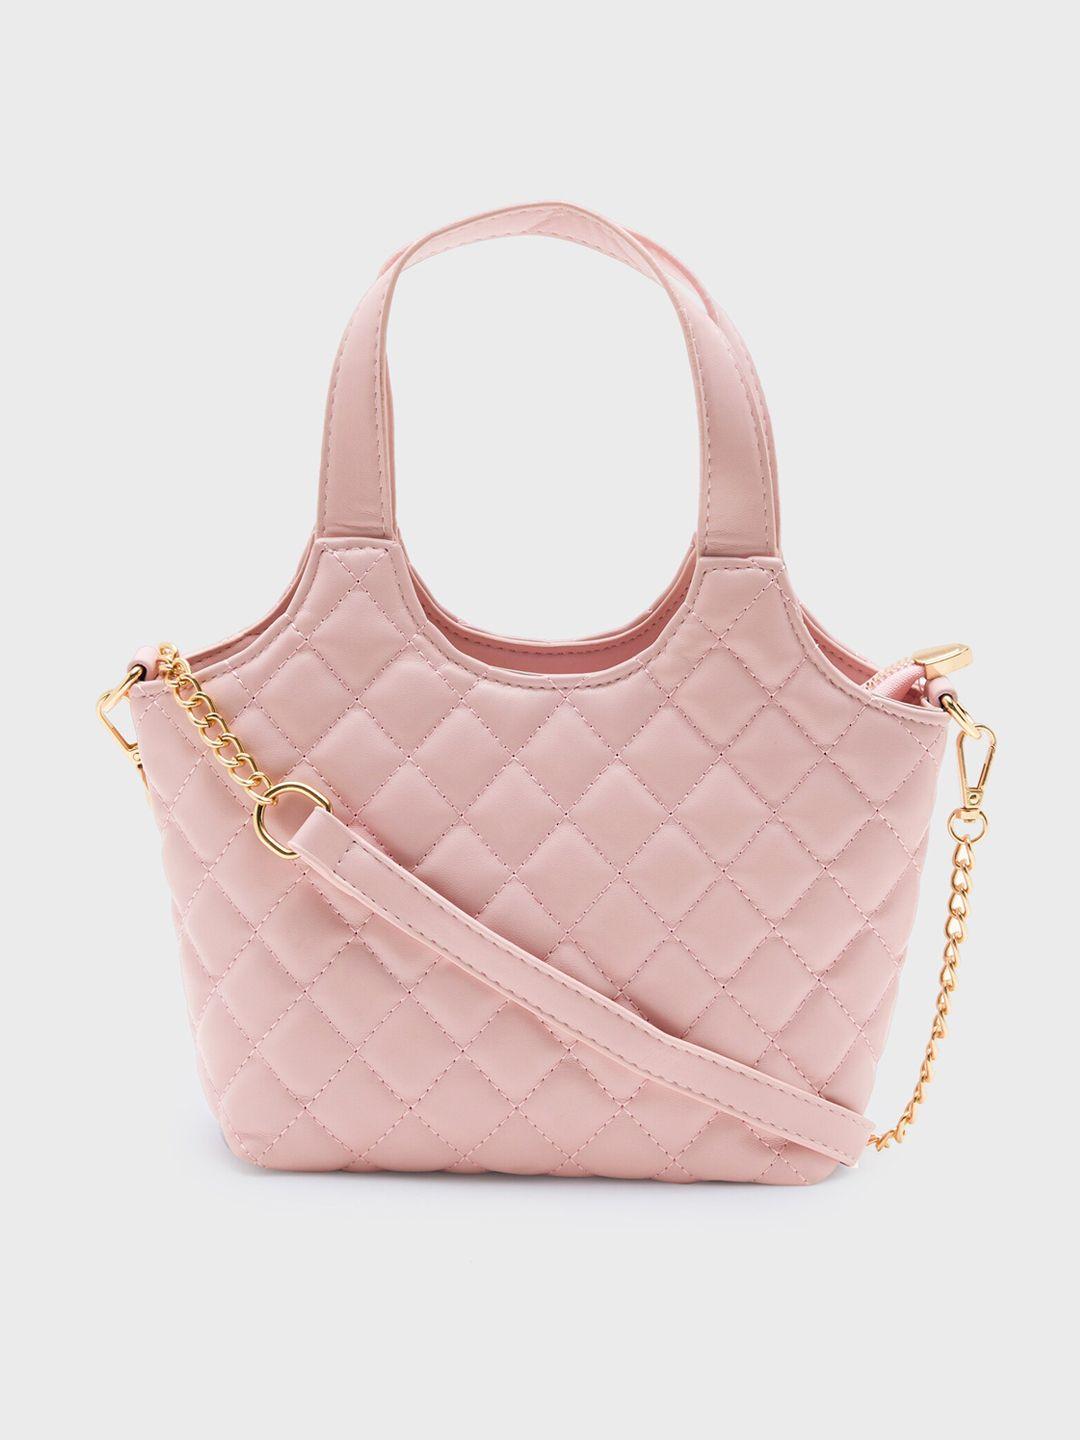 20dresses pink textured oversized structured handheld bag with quilted